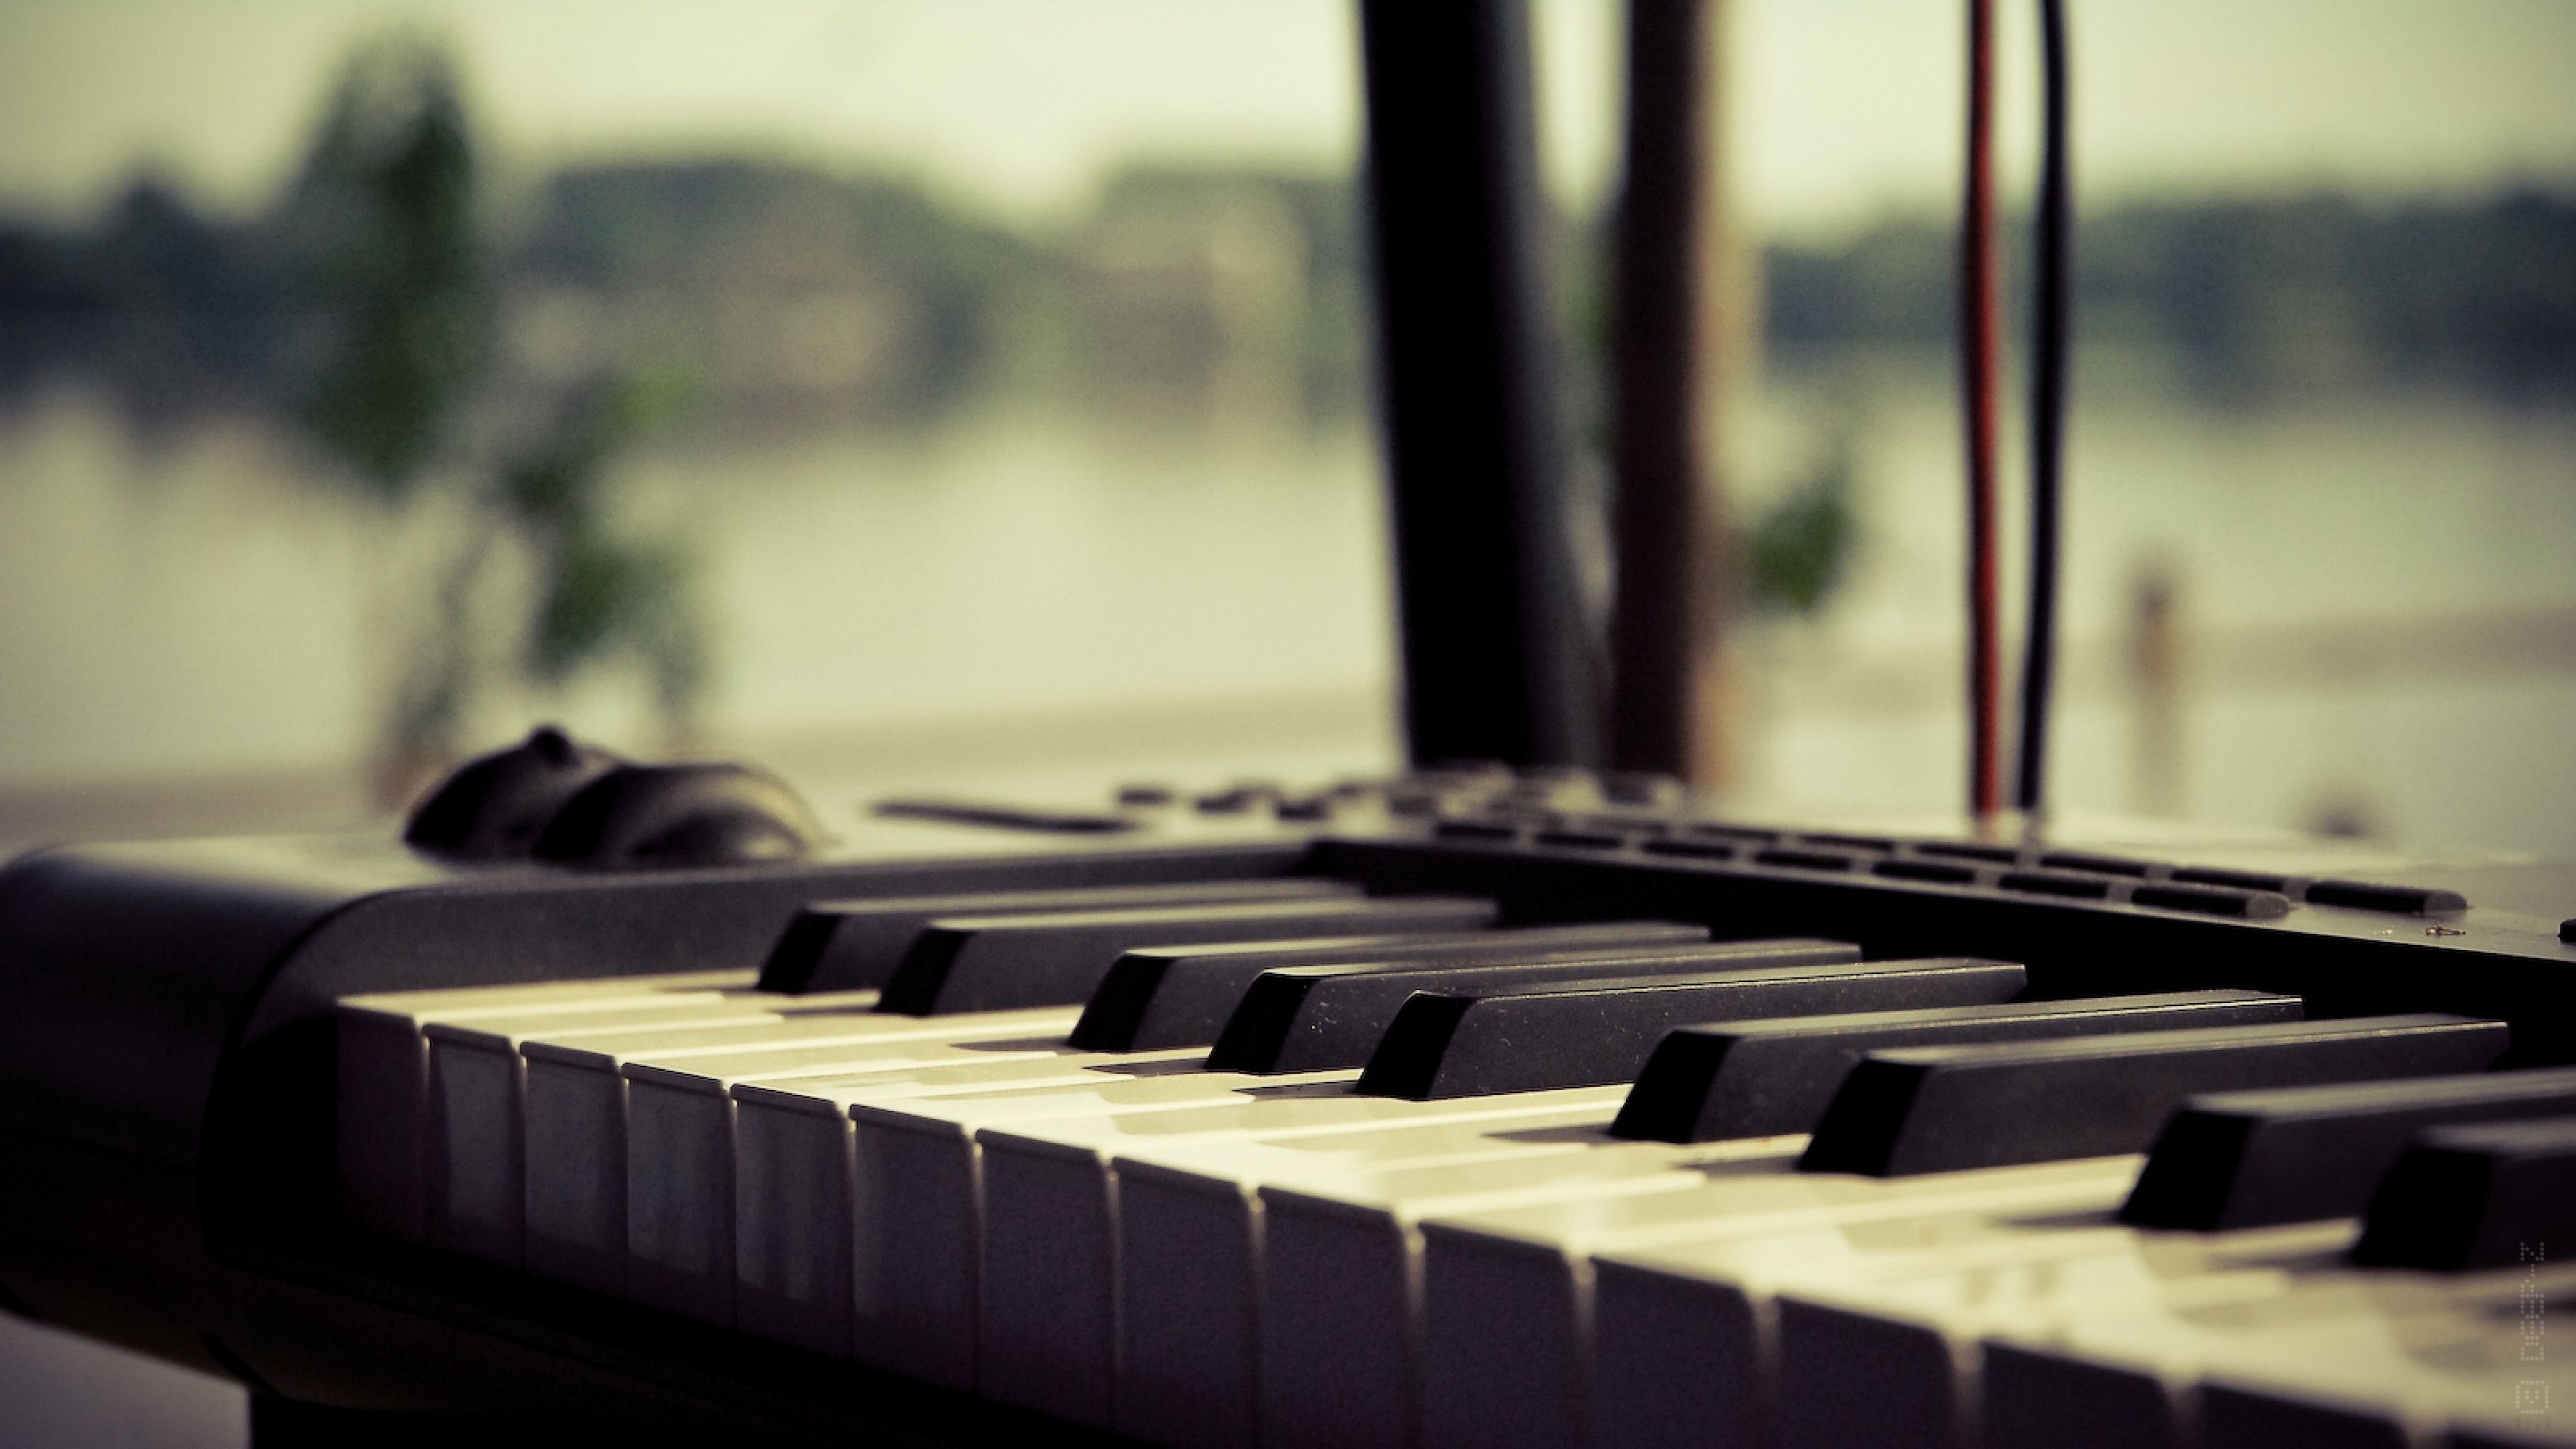 3840x2160 Vintage Piano Wallpapers Top Free Vintage Piano Backgrounds